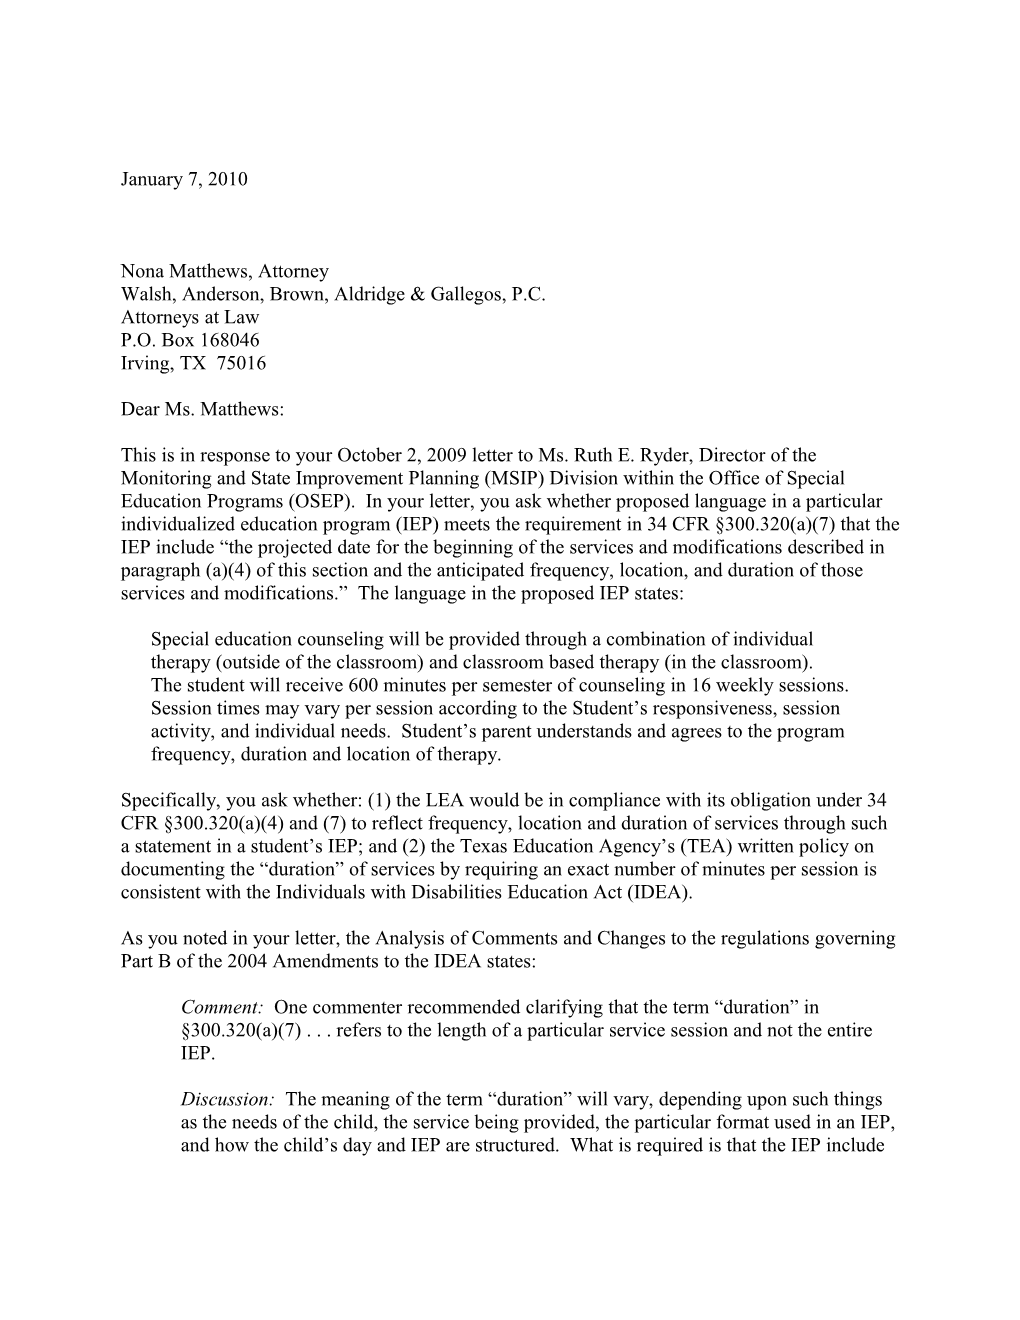 Matthews Letter Dated 01/07/10 Re: Individualized Education Programs (MS Word)